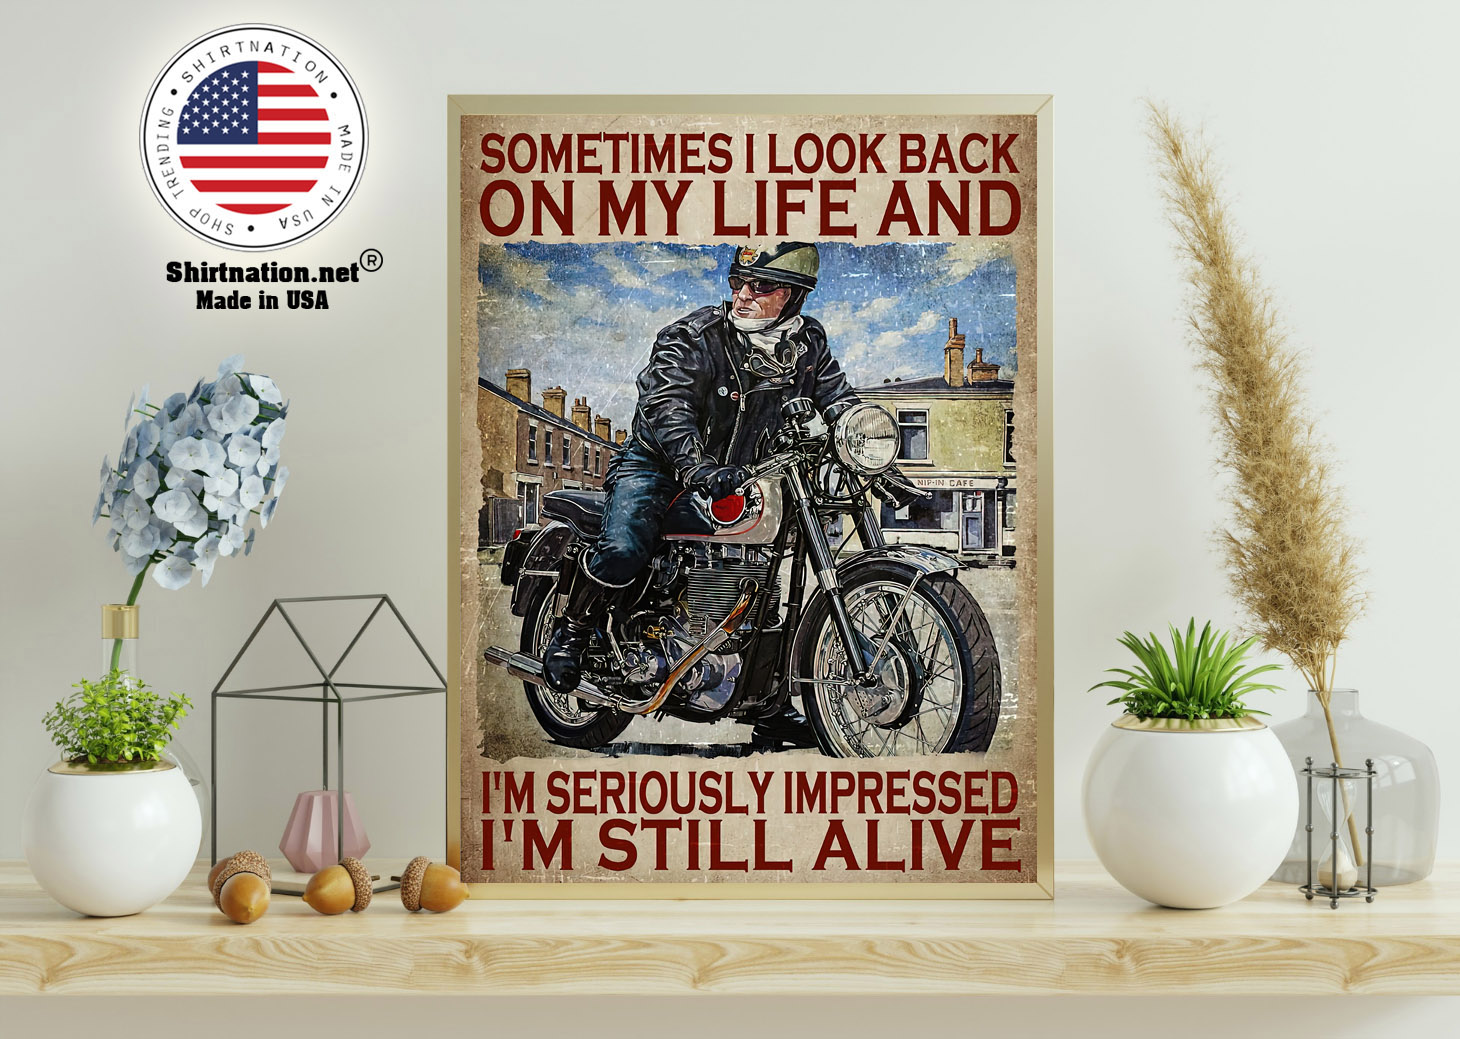 Motorcycles man Sometimes I look back on my life and Im seriously impressed Im still alive poster 15